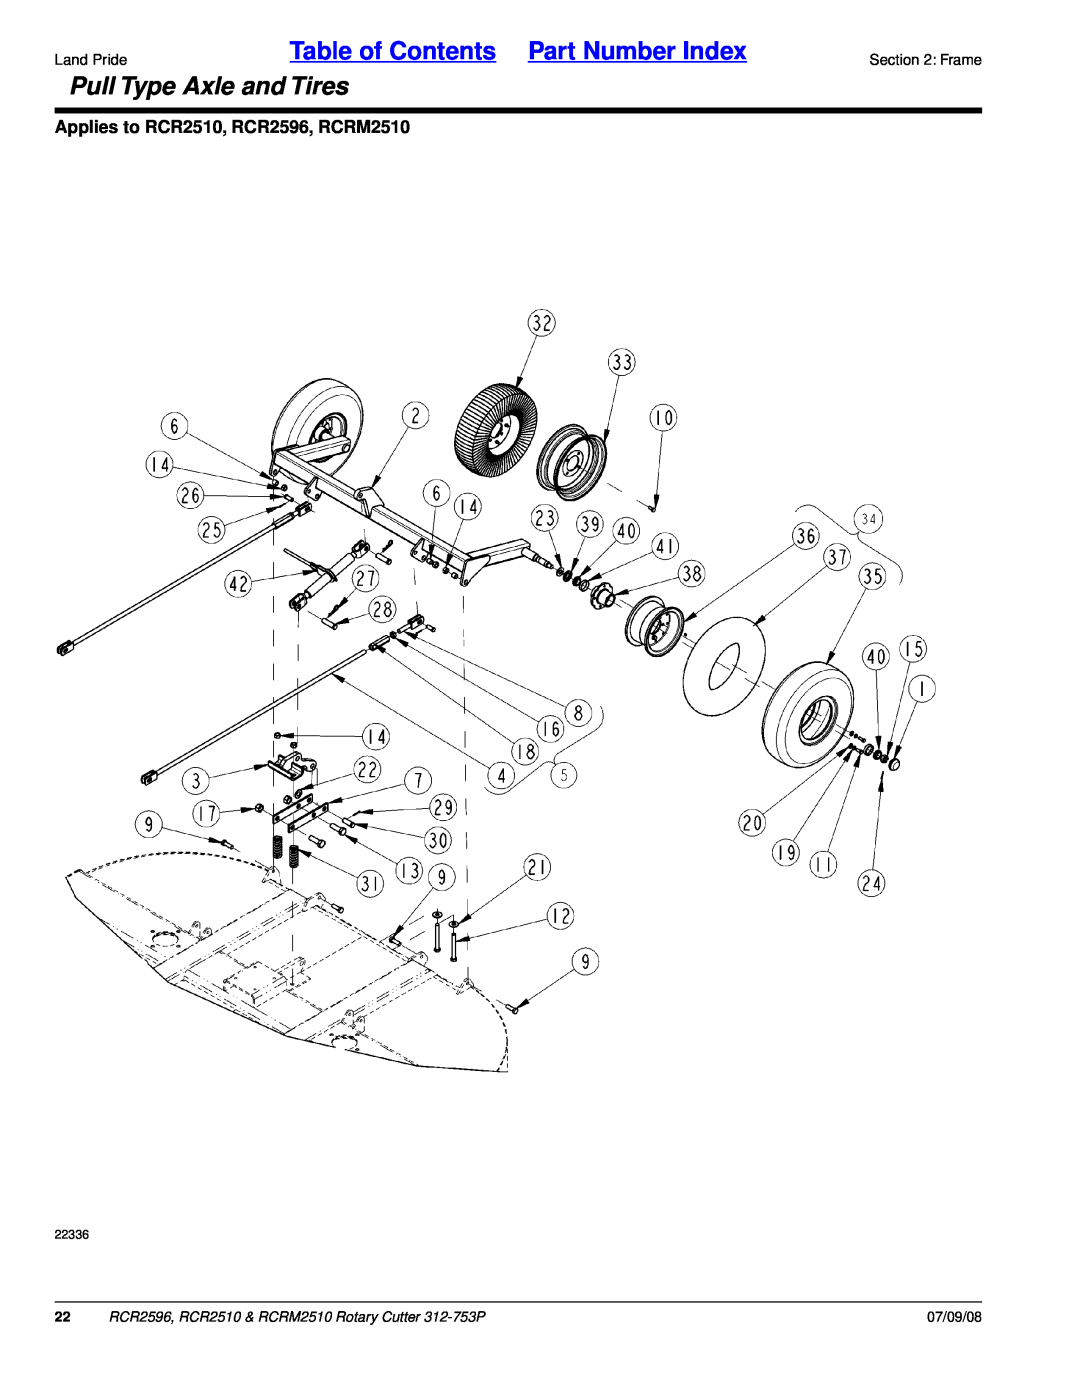 Land Pride manual Pull Type Axle and Tires, Table of Contents Part Number Index, Applies to RCR2510, RCR2596, RCRM2510 